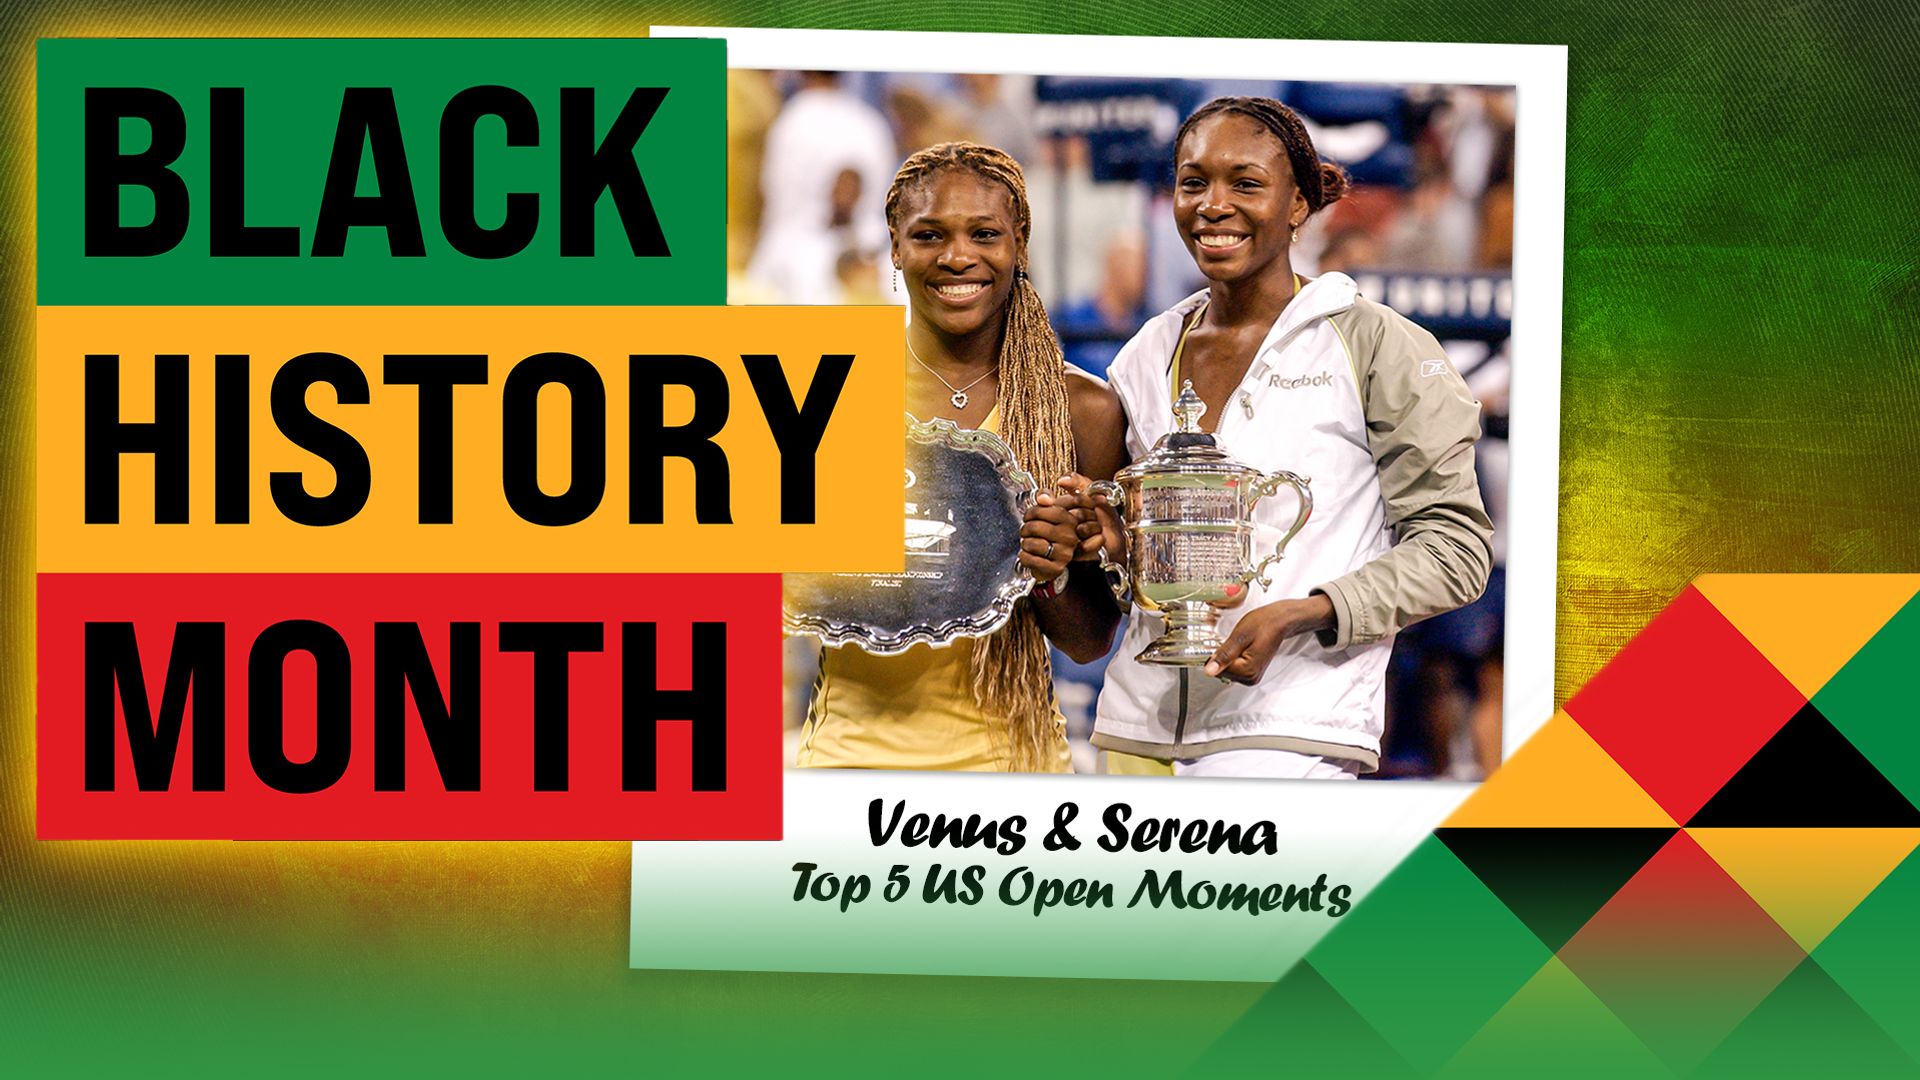 Black History Month: Williams sisters' top five US Open moments